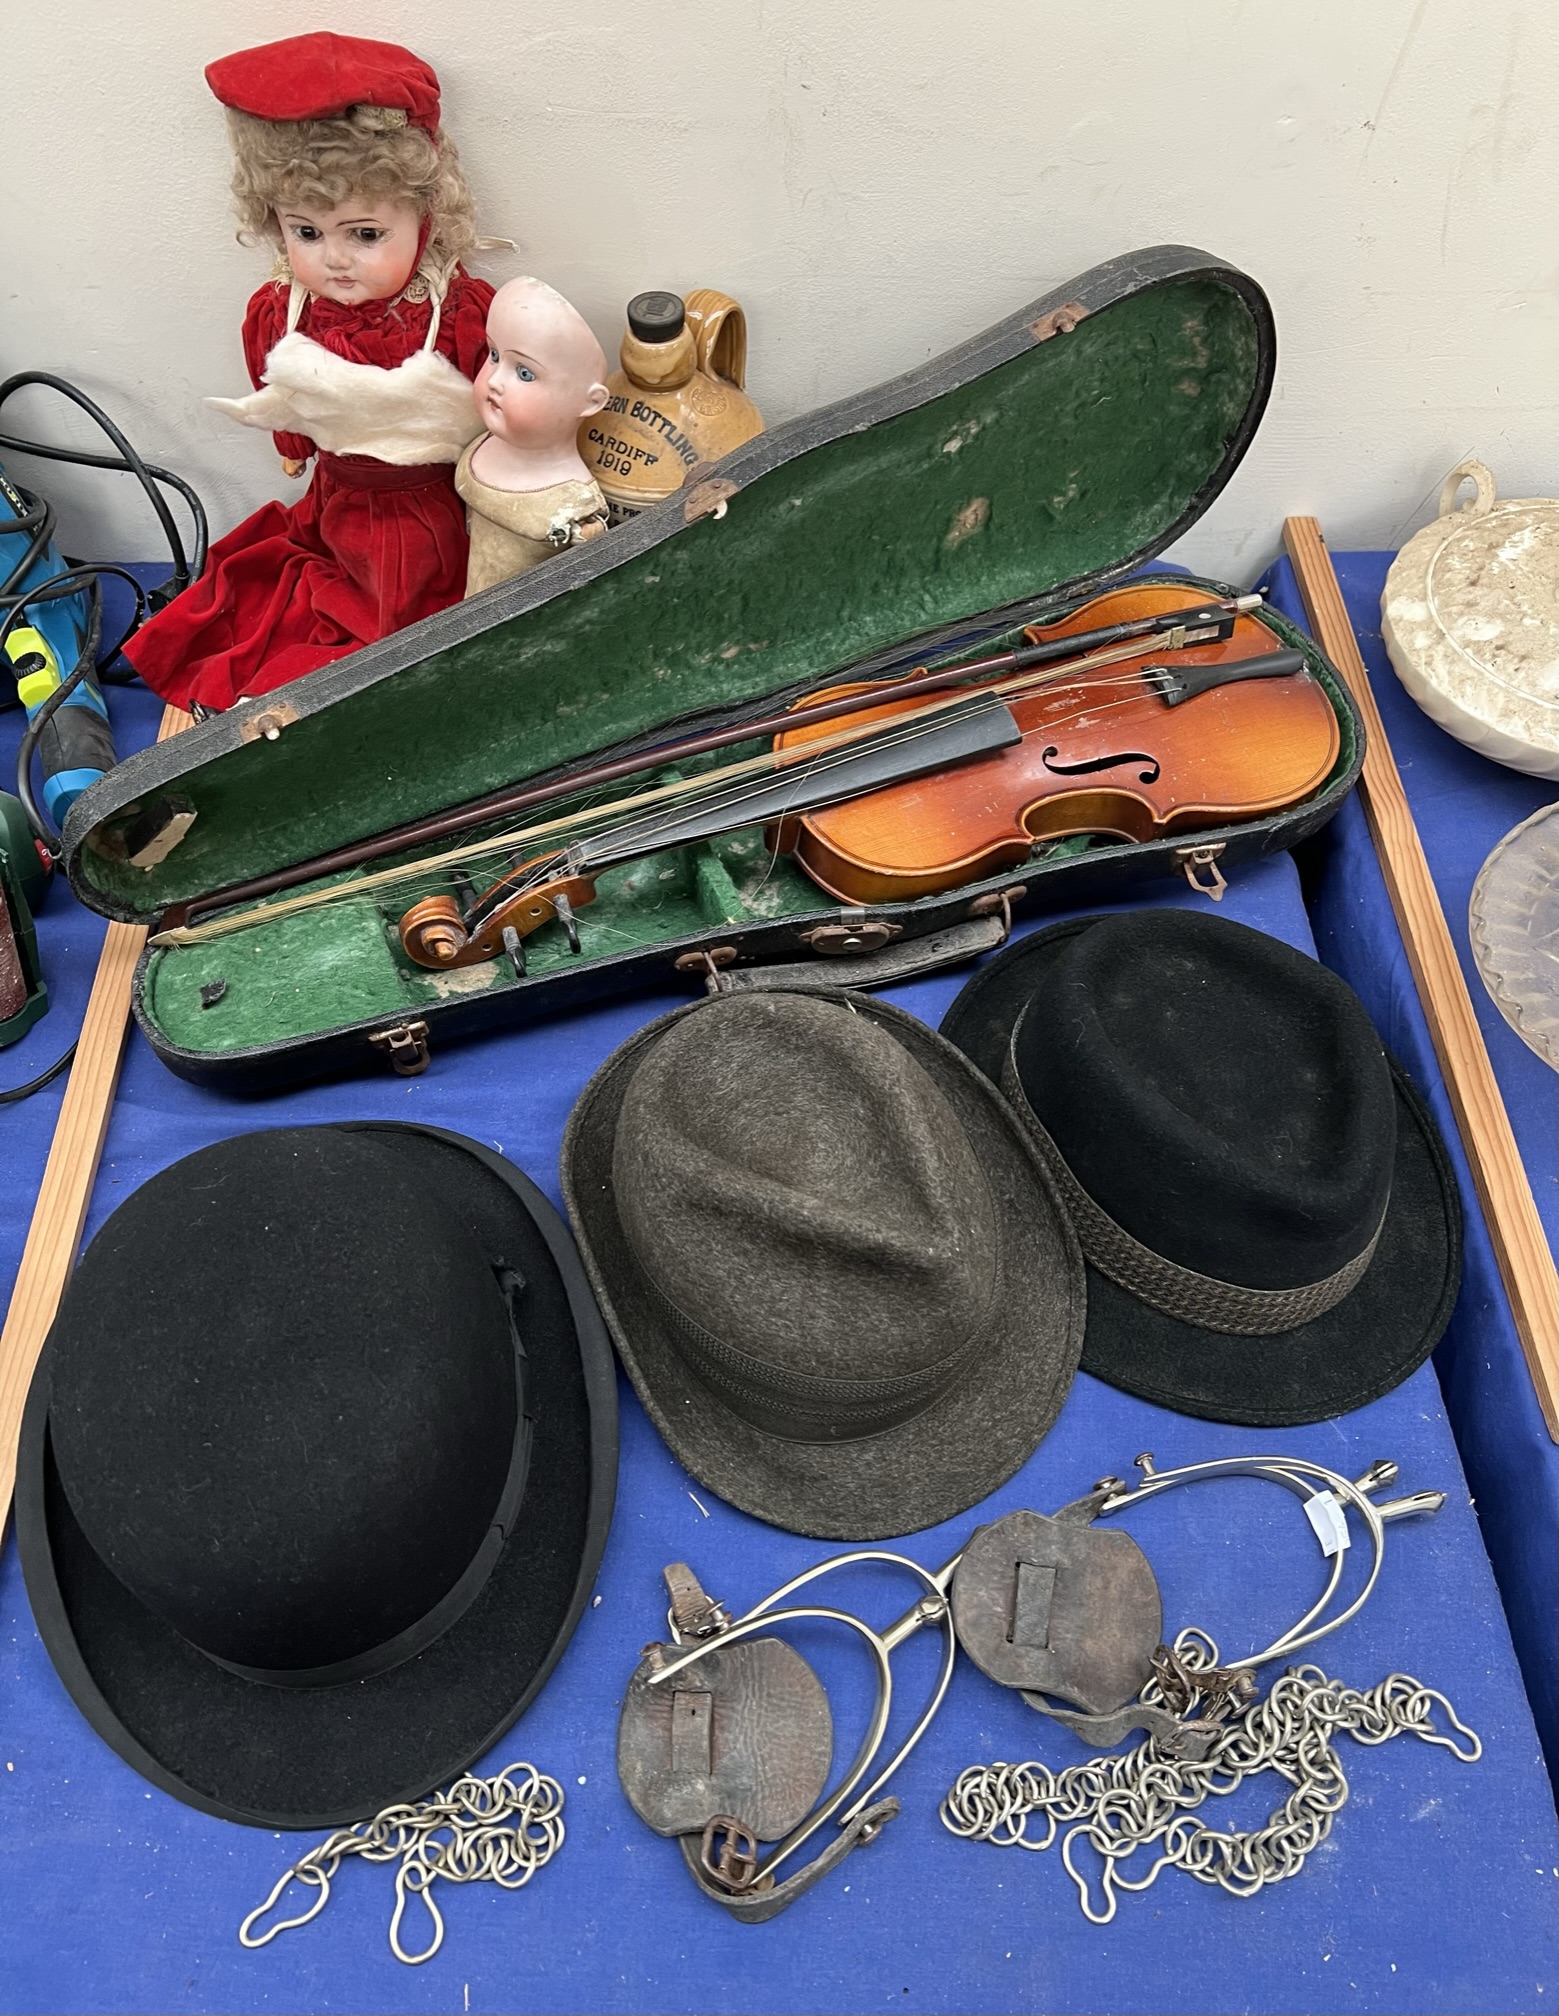 An Armand Marseille doll together with another doll, violin, bow,